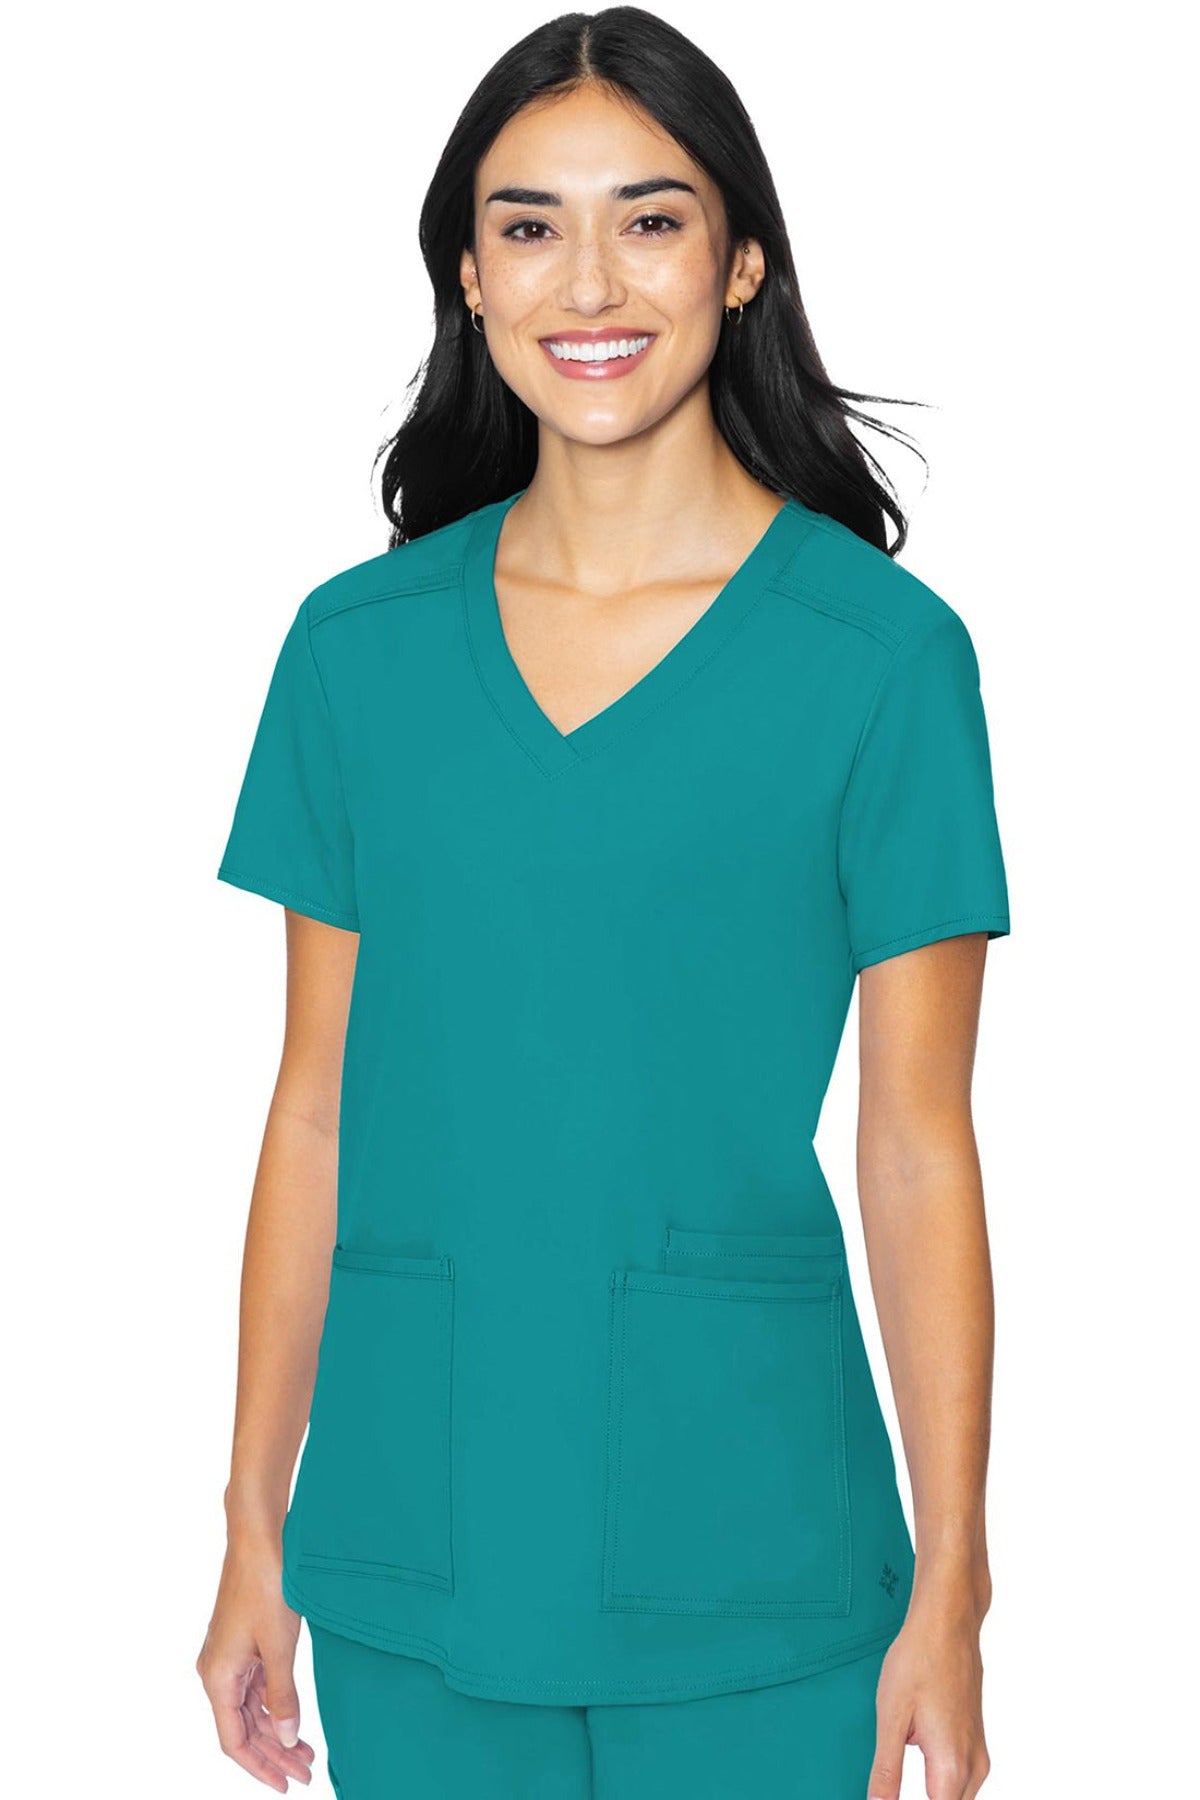 Med Couture Scrub Top Insight Classic V-Neck 3 Pocket in Teal at Parker's Clothing and Shoes.